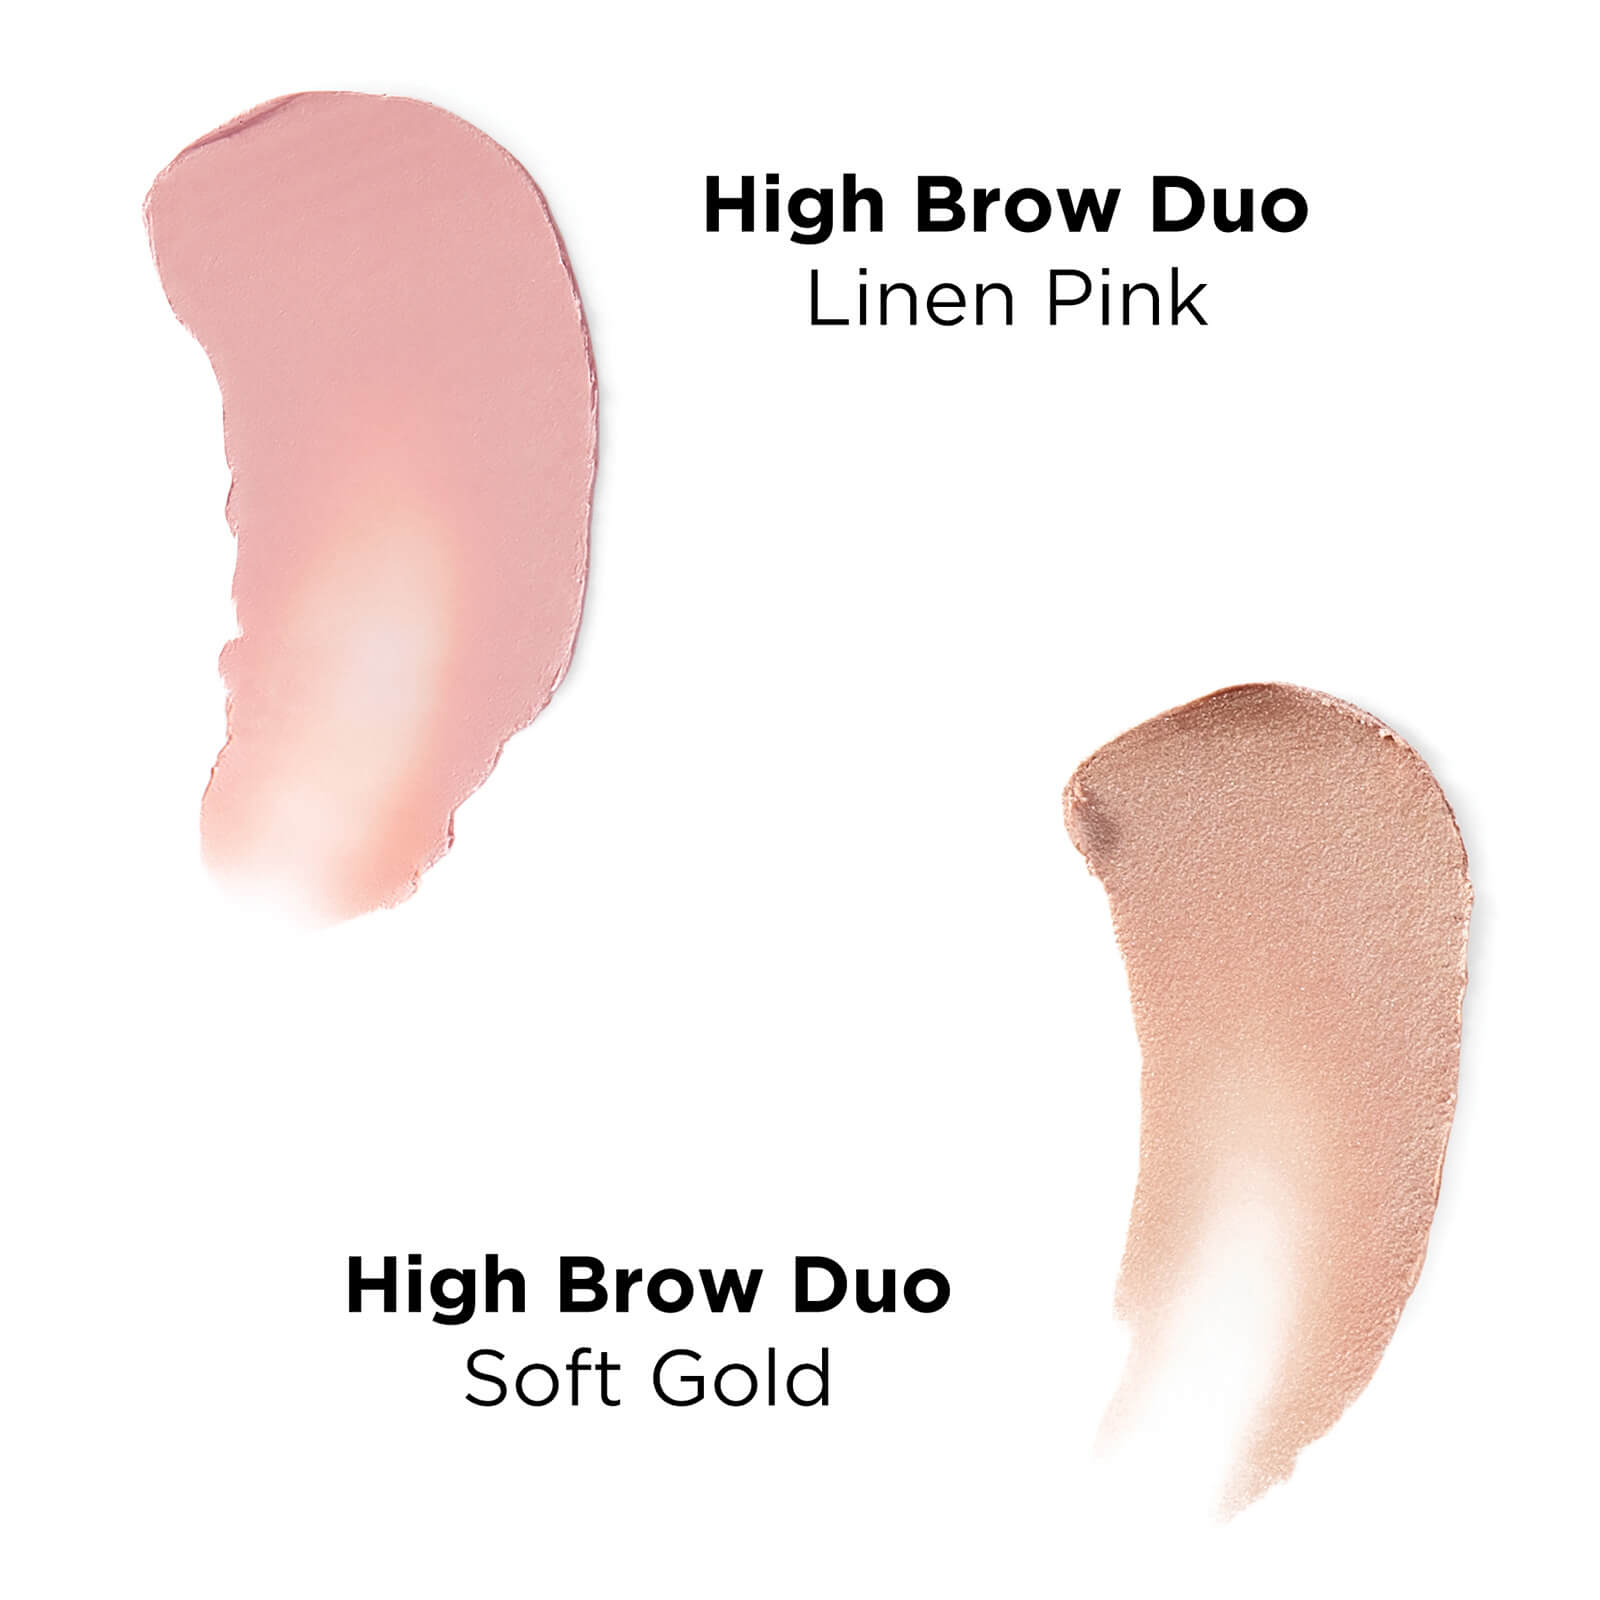 High Brow Duo swatches